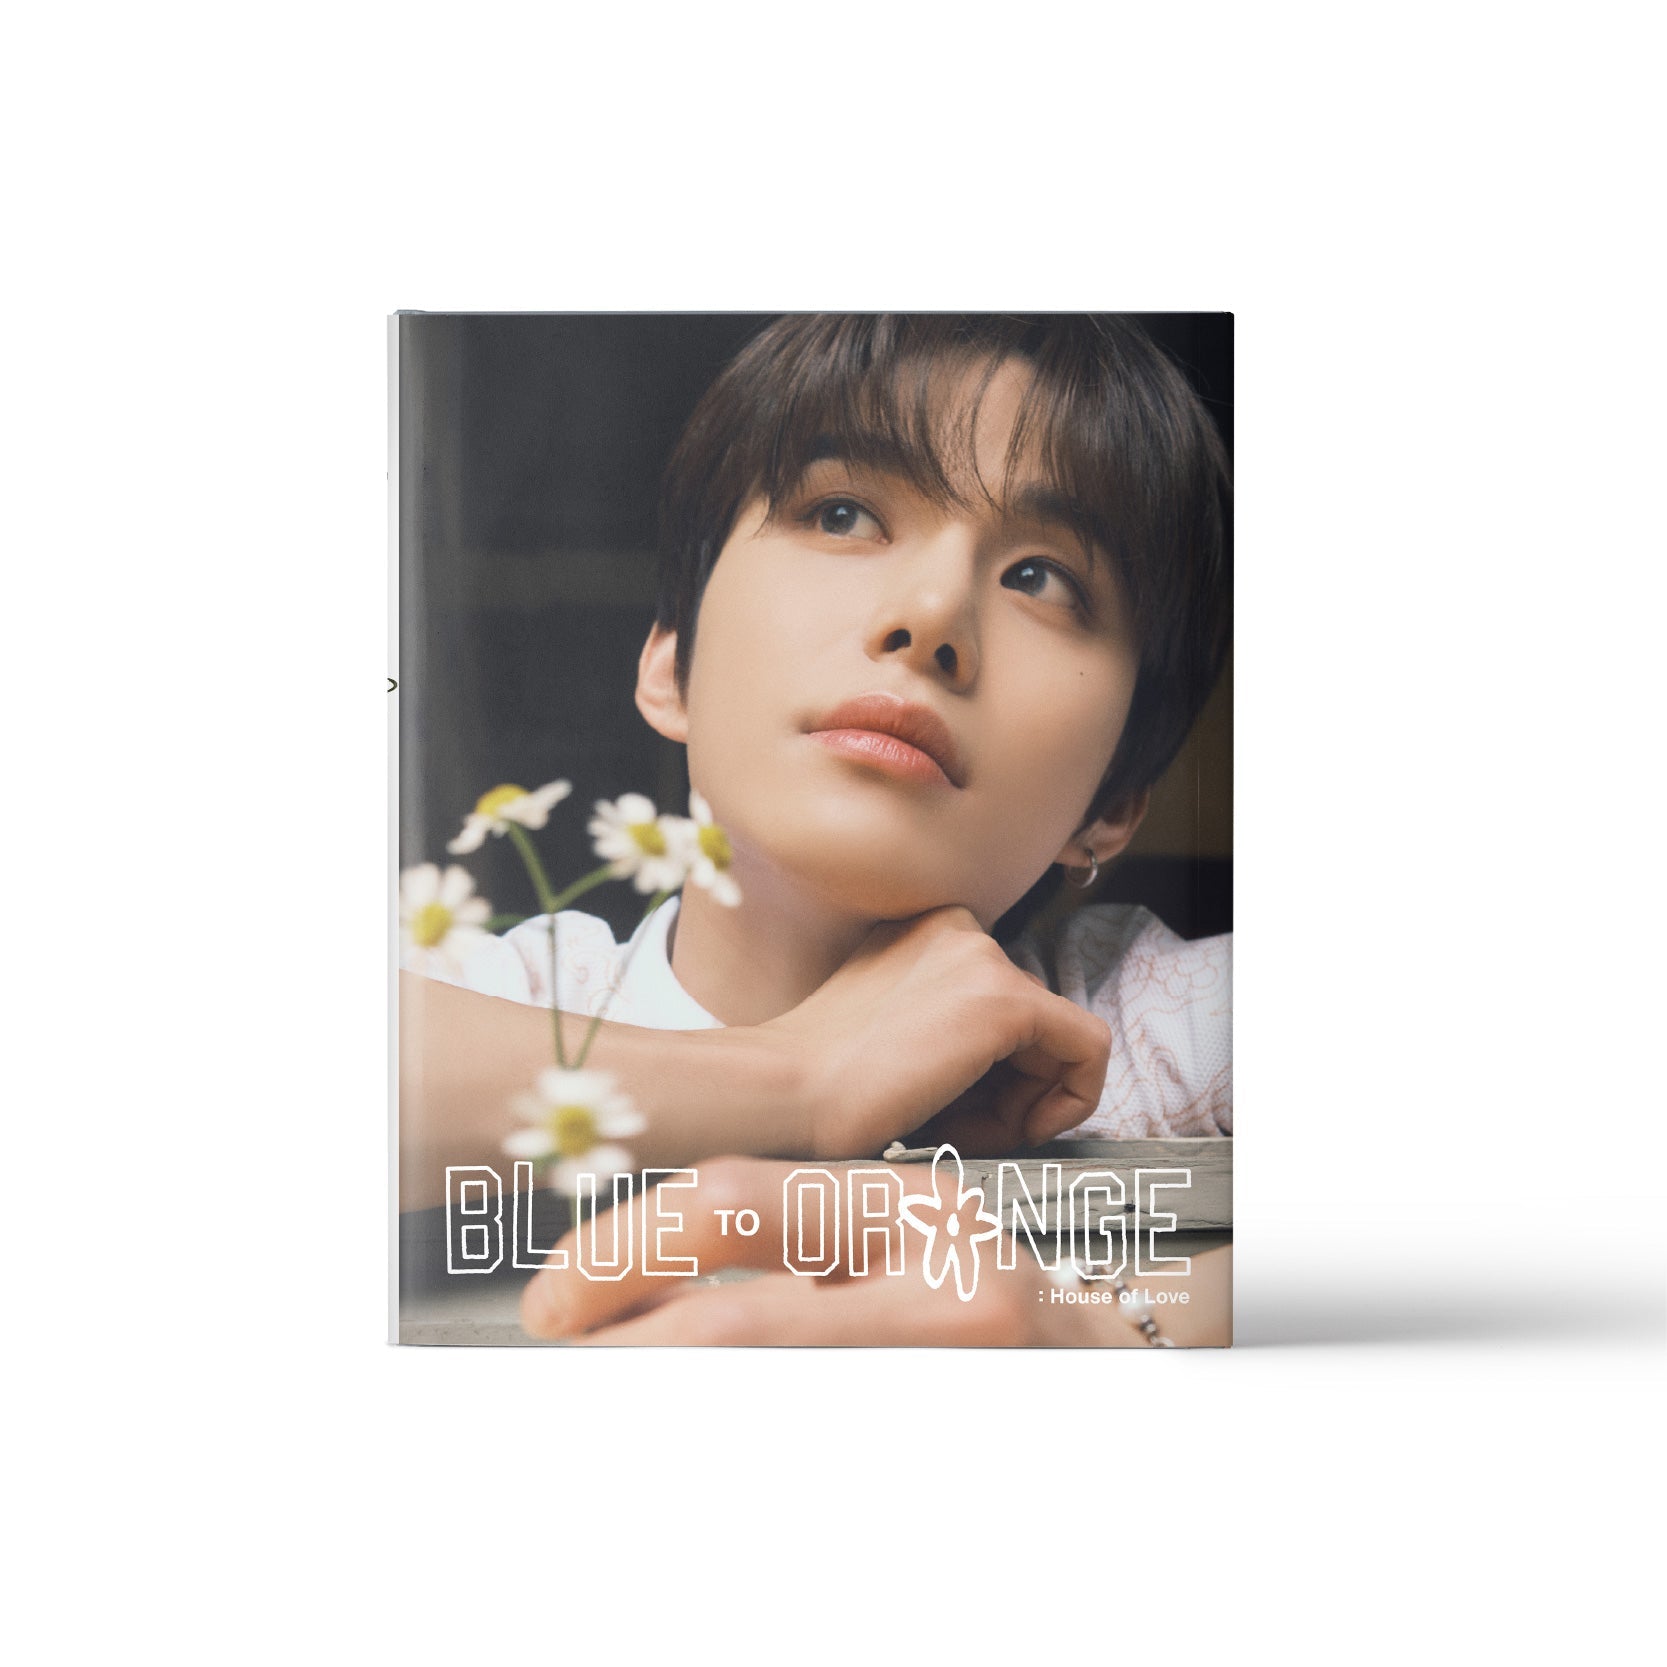 NCT 127 PHOTOBOOK 'BLUE TO ORANGE : HOUSE OF LOVE' JUNGWOO VERSION COVER